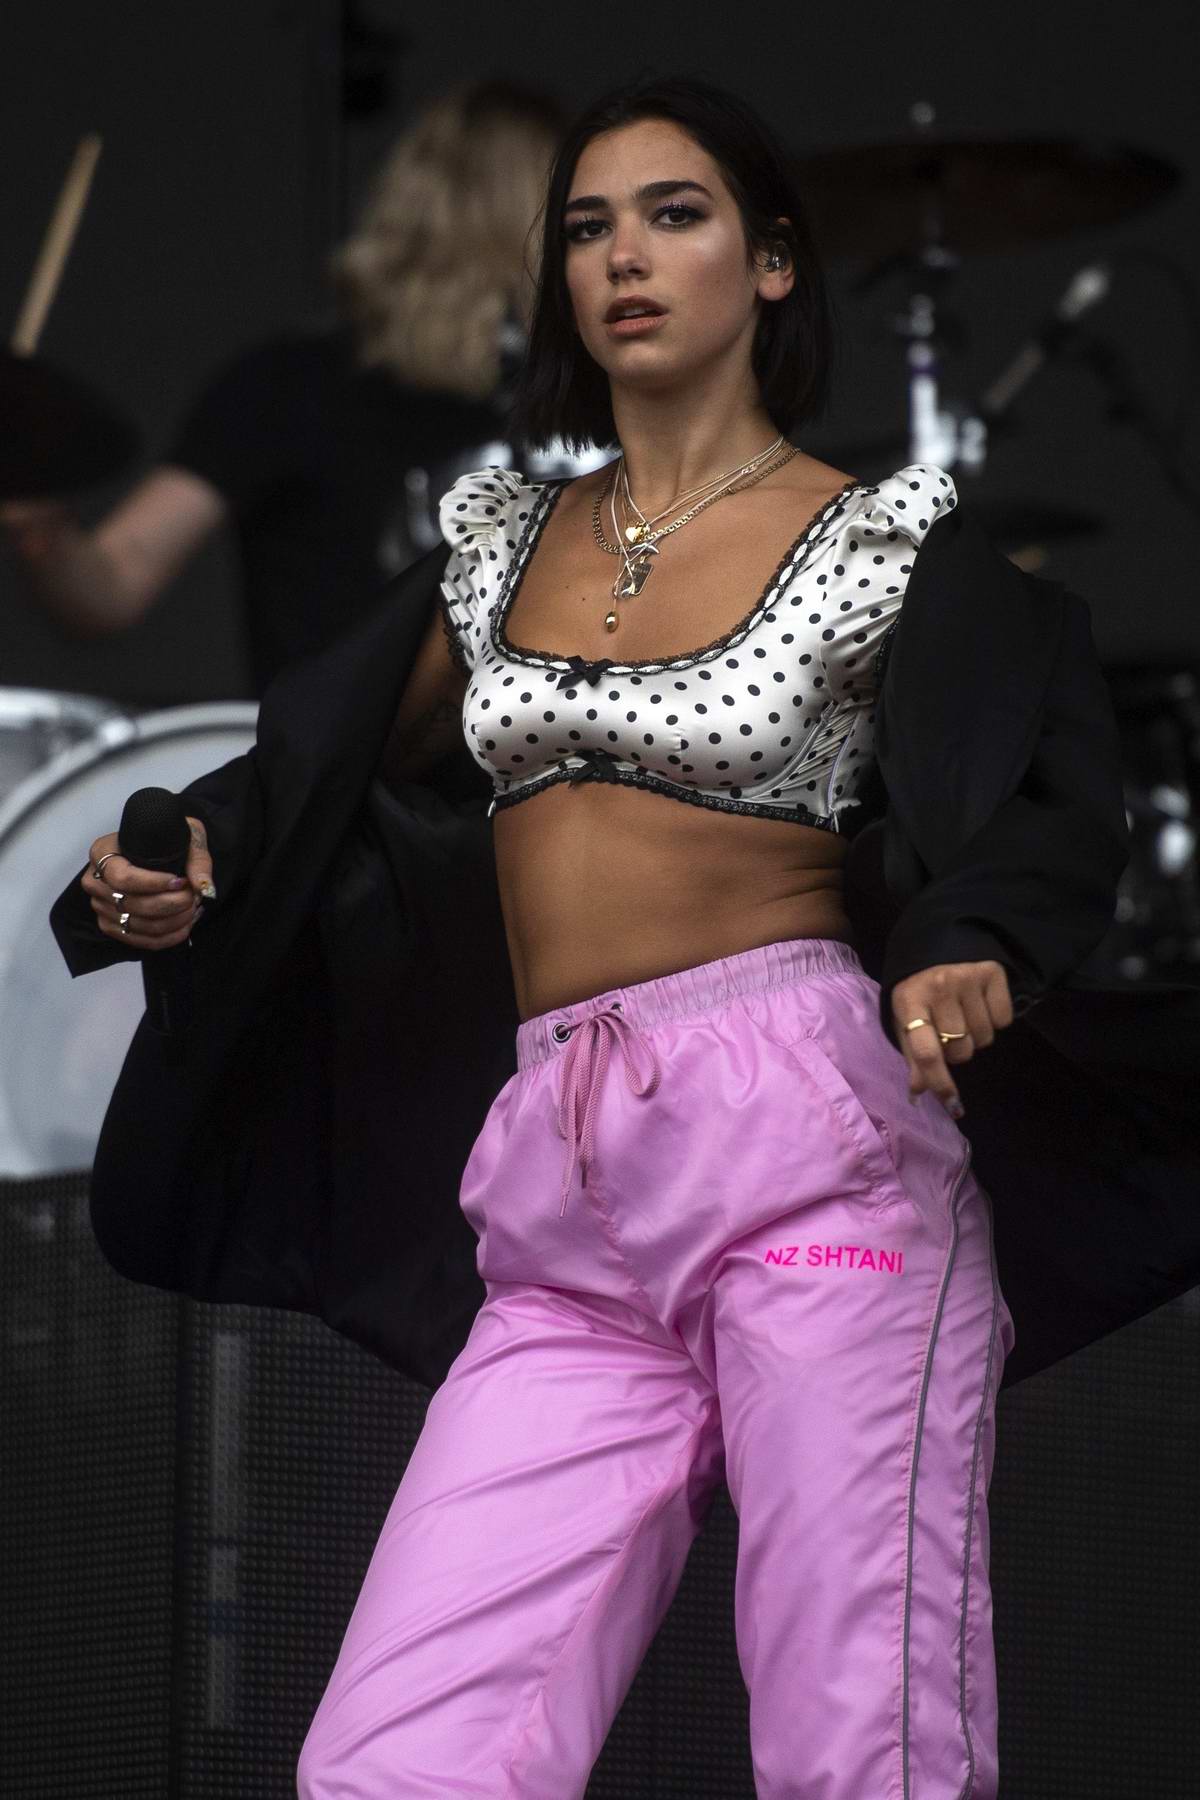 Dua Lipa performs at Leeds Festival 2018 in heavy rain while wearing pink  trousers and a